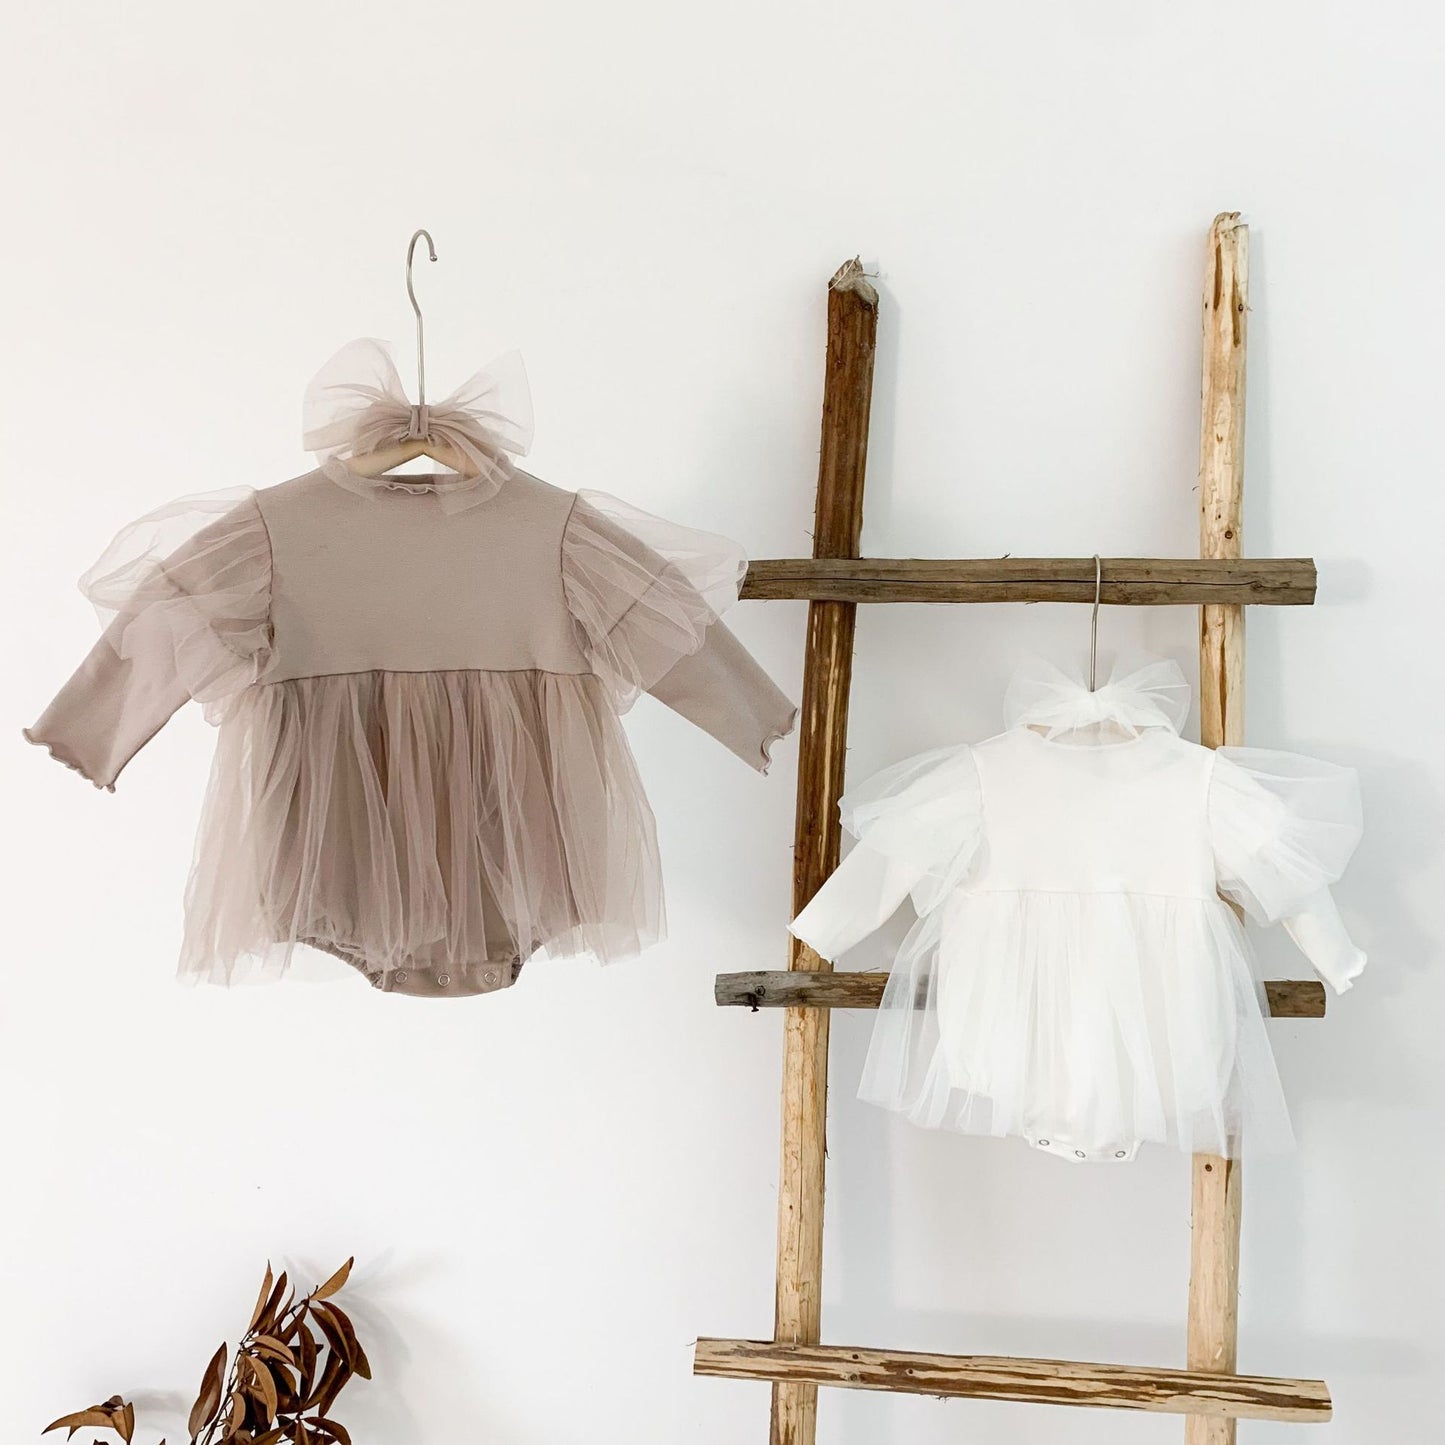 Baby Girl Mesh Tutu Skirt With Solid Top Dress In Spring